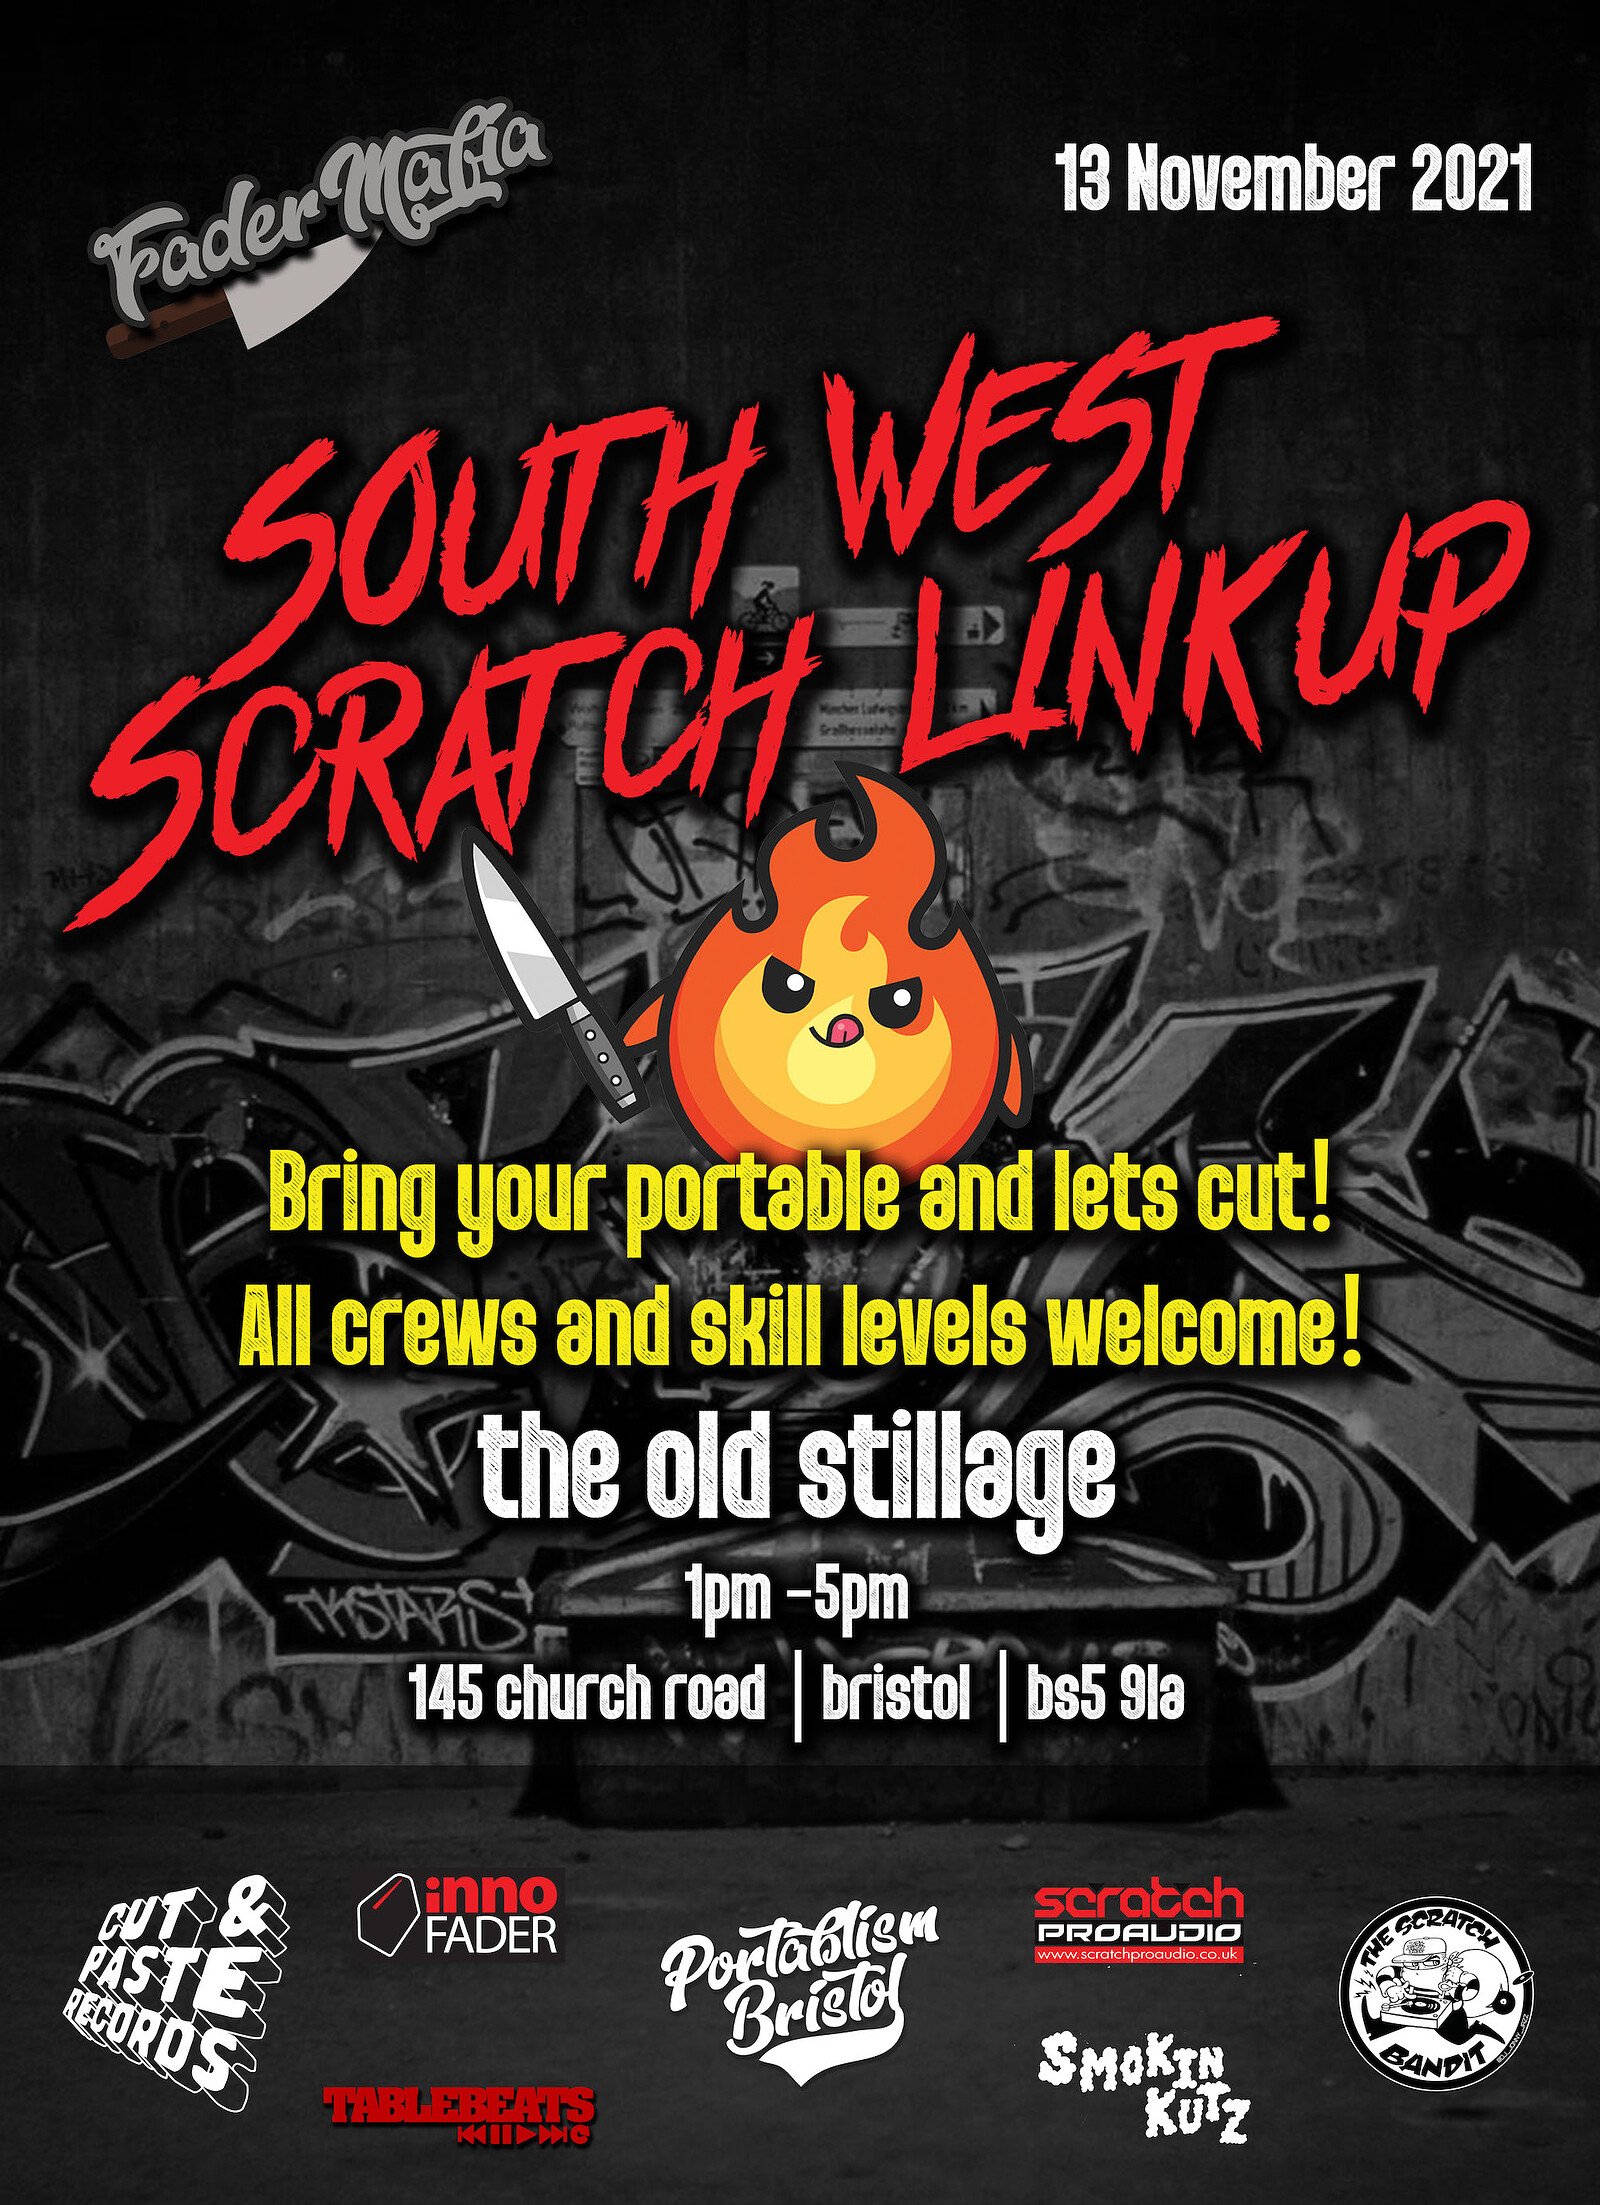 South West Scratch Link-Up at The Old Stillage